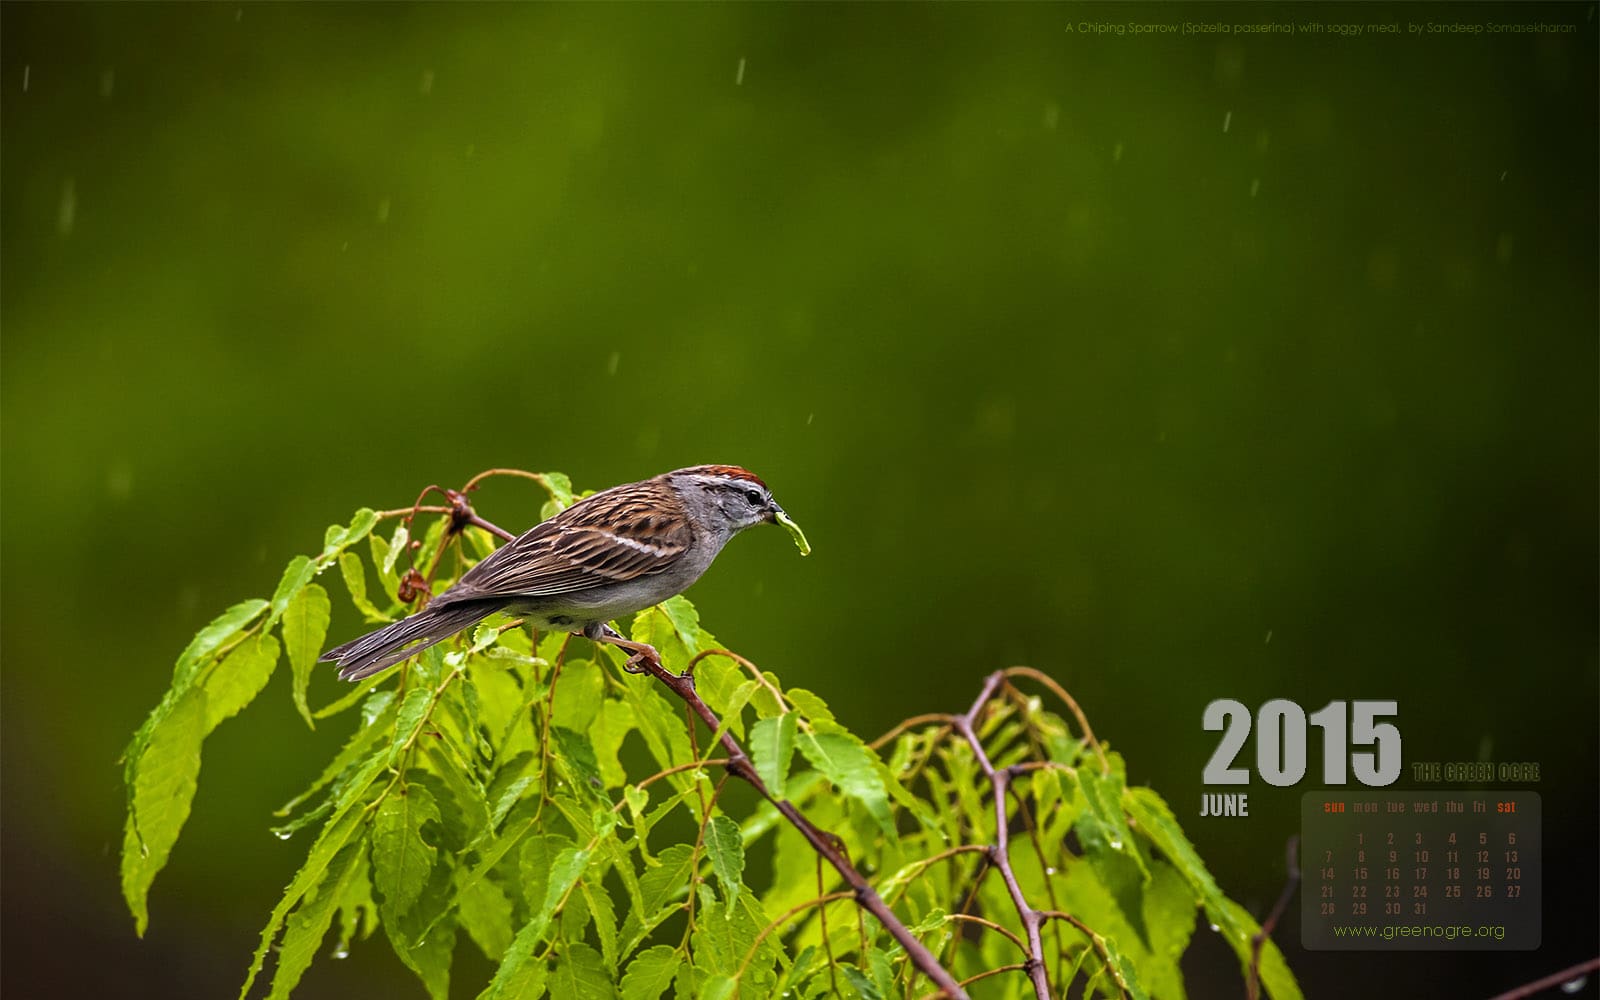 A Chipping Sparrow in the rain, for your June wallpaper